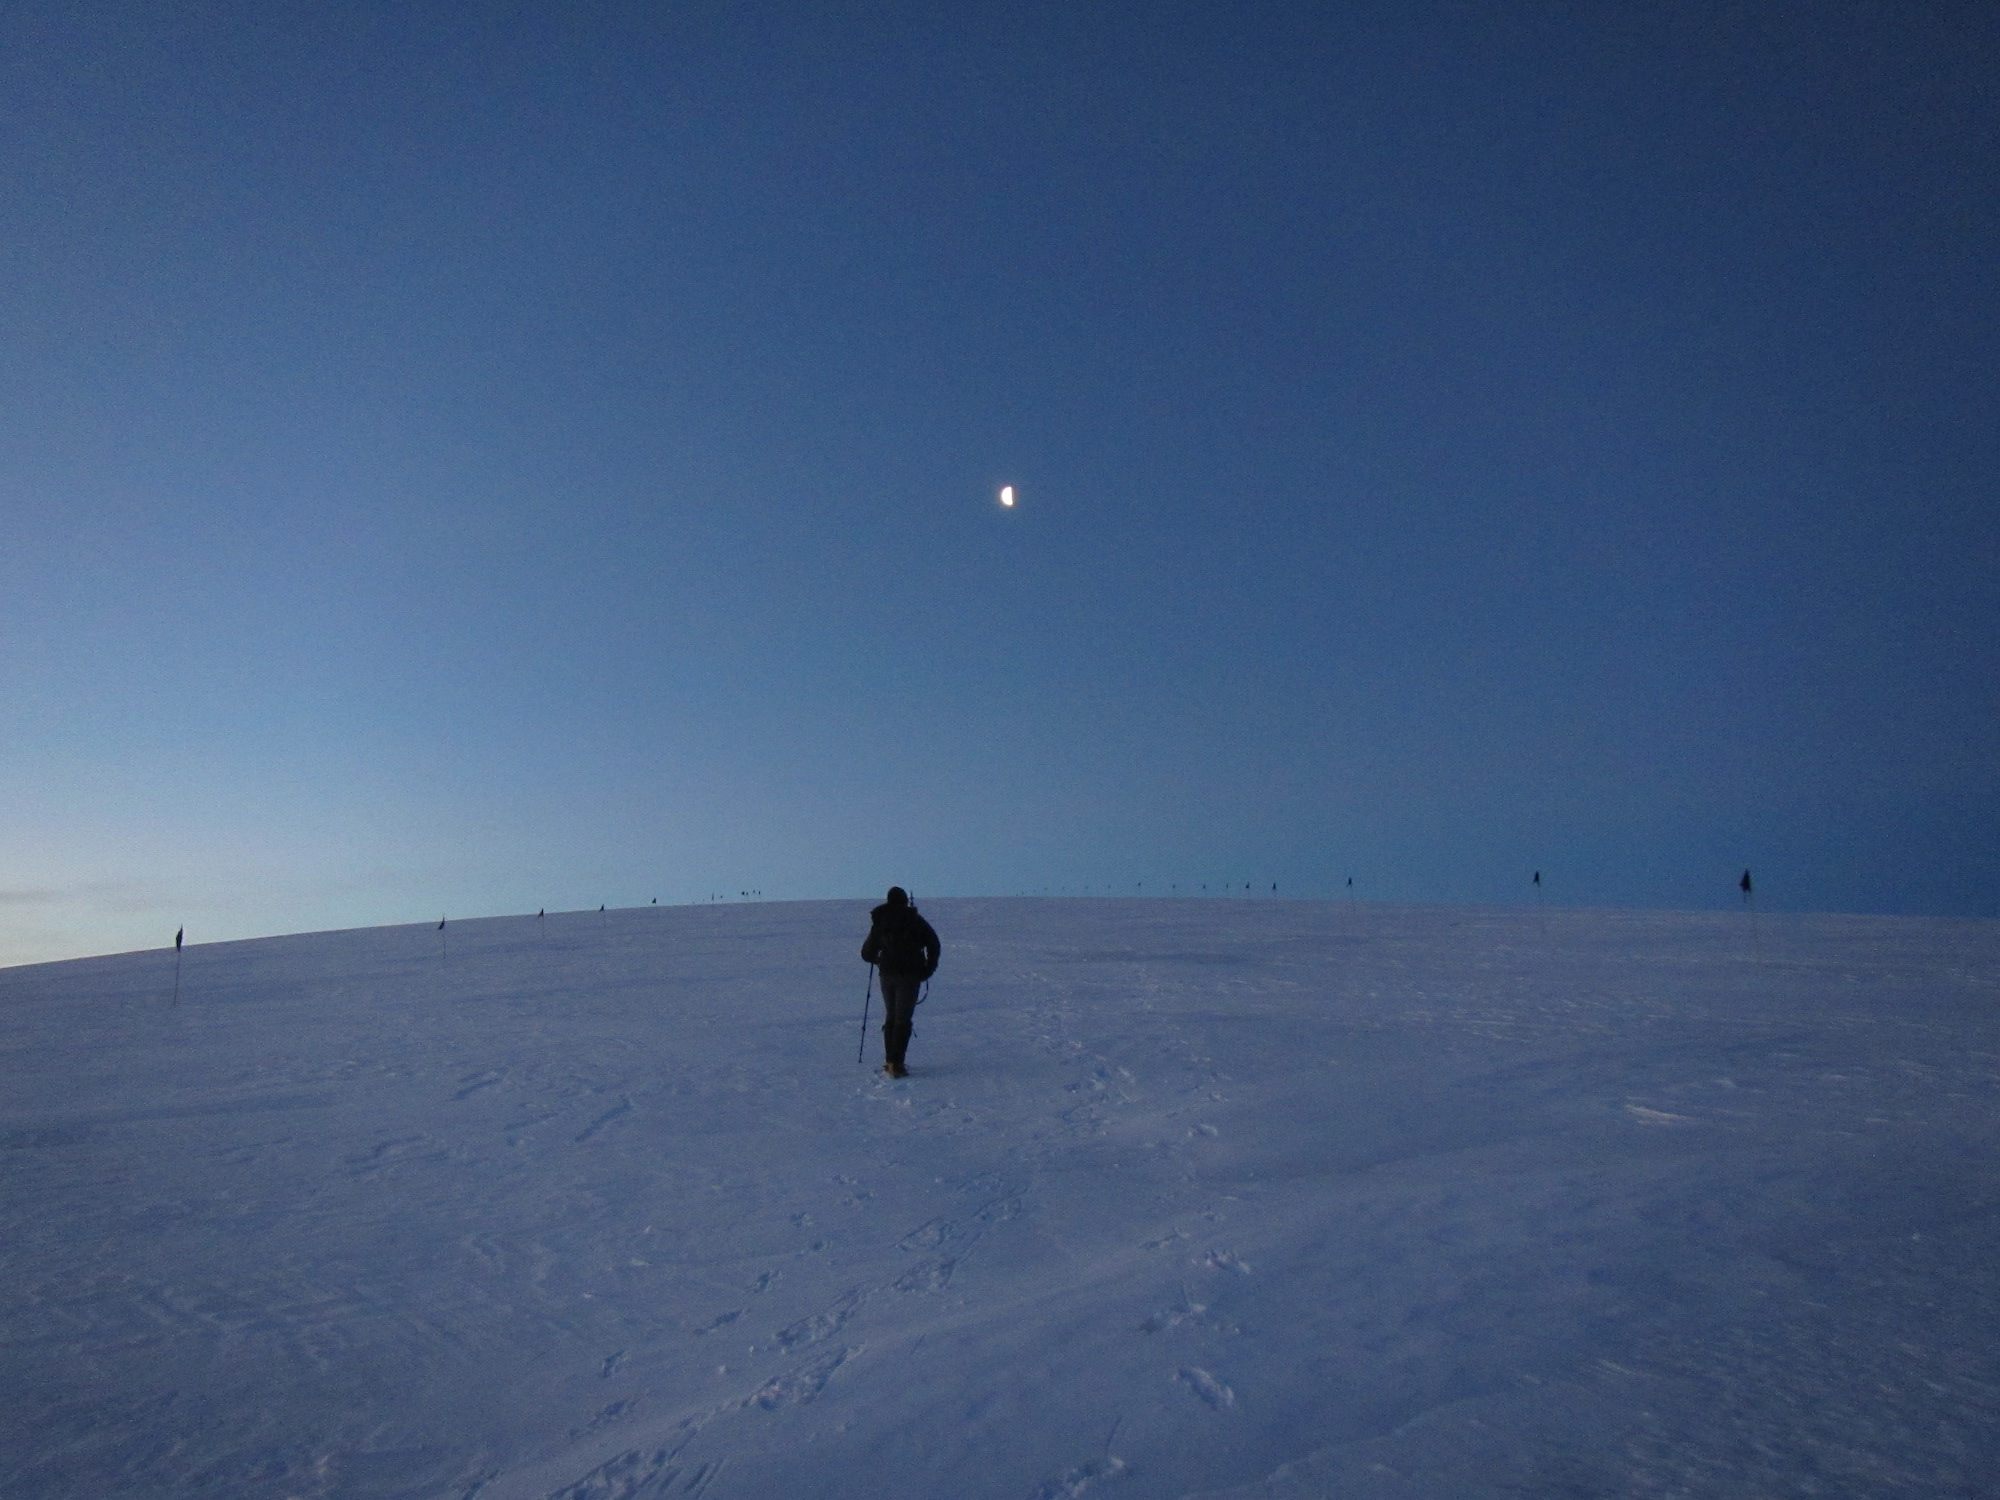 Spring days bring a twilight that last for hours. Greg makes his way up the glacier toward the rising moon.